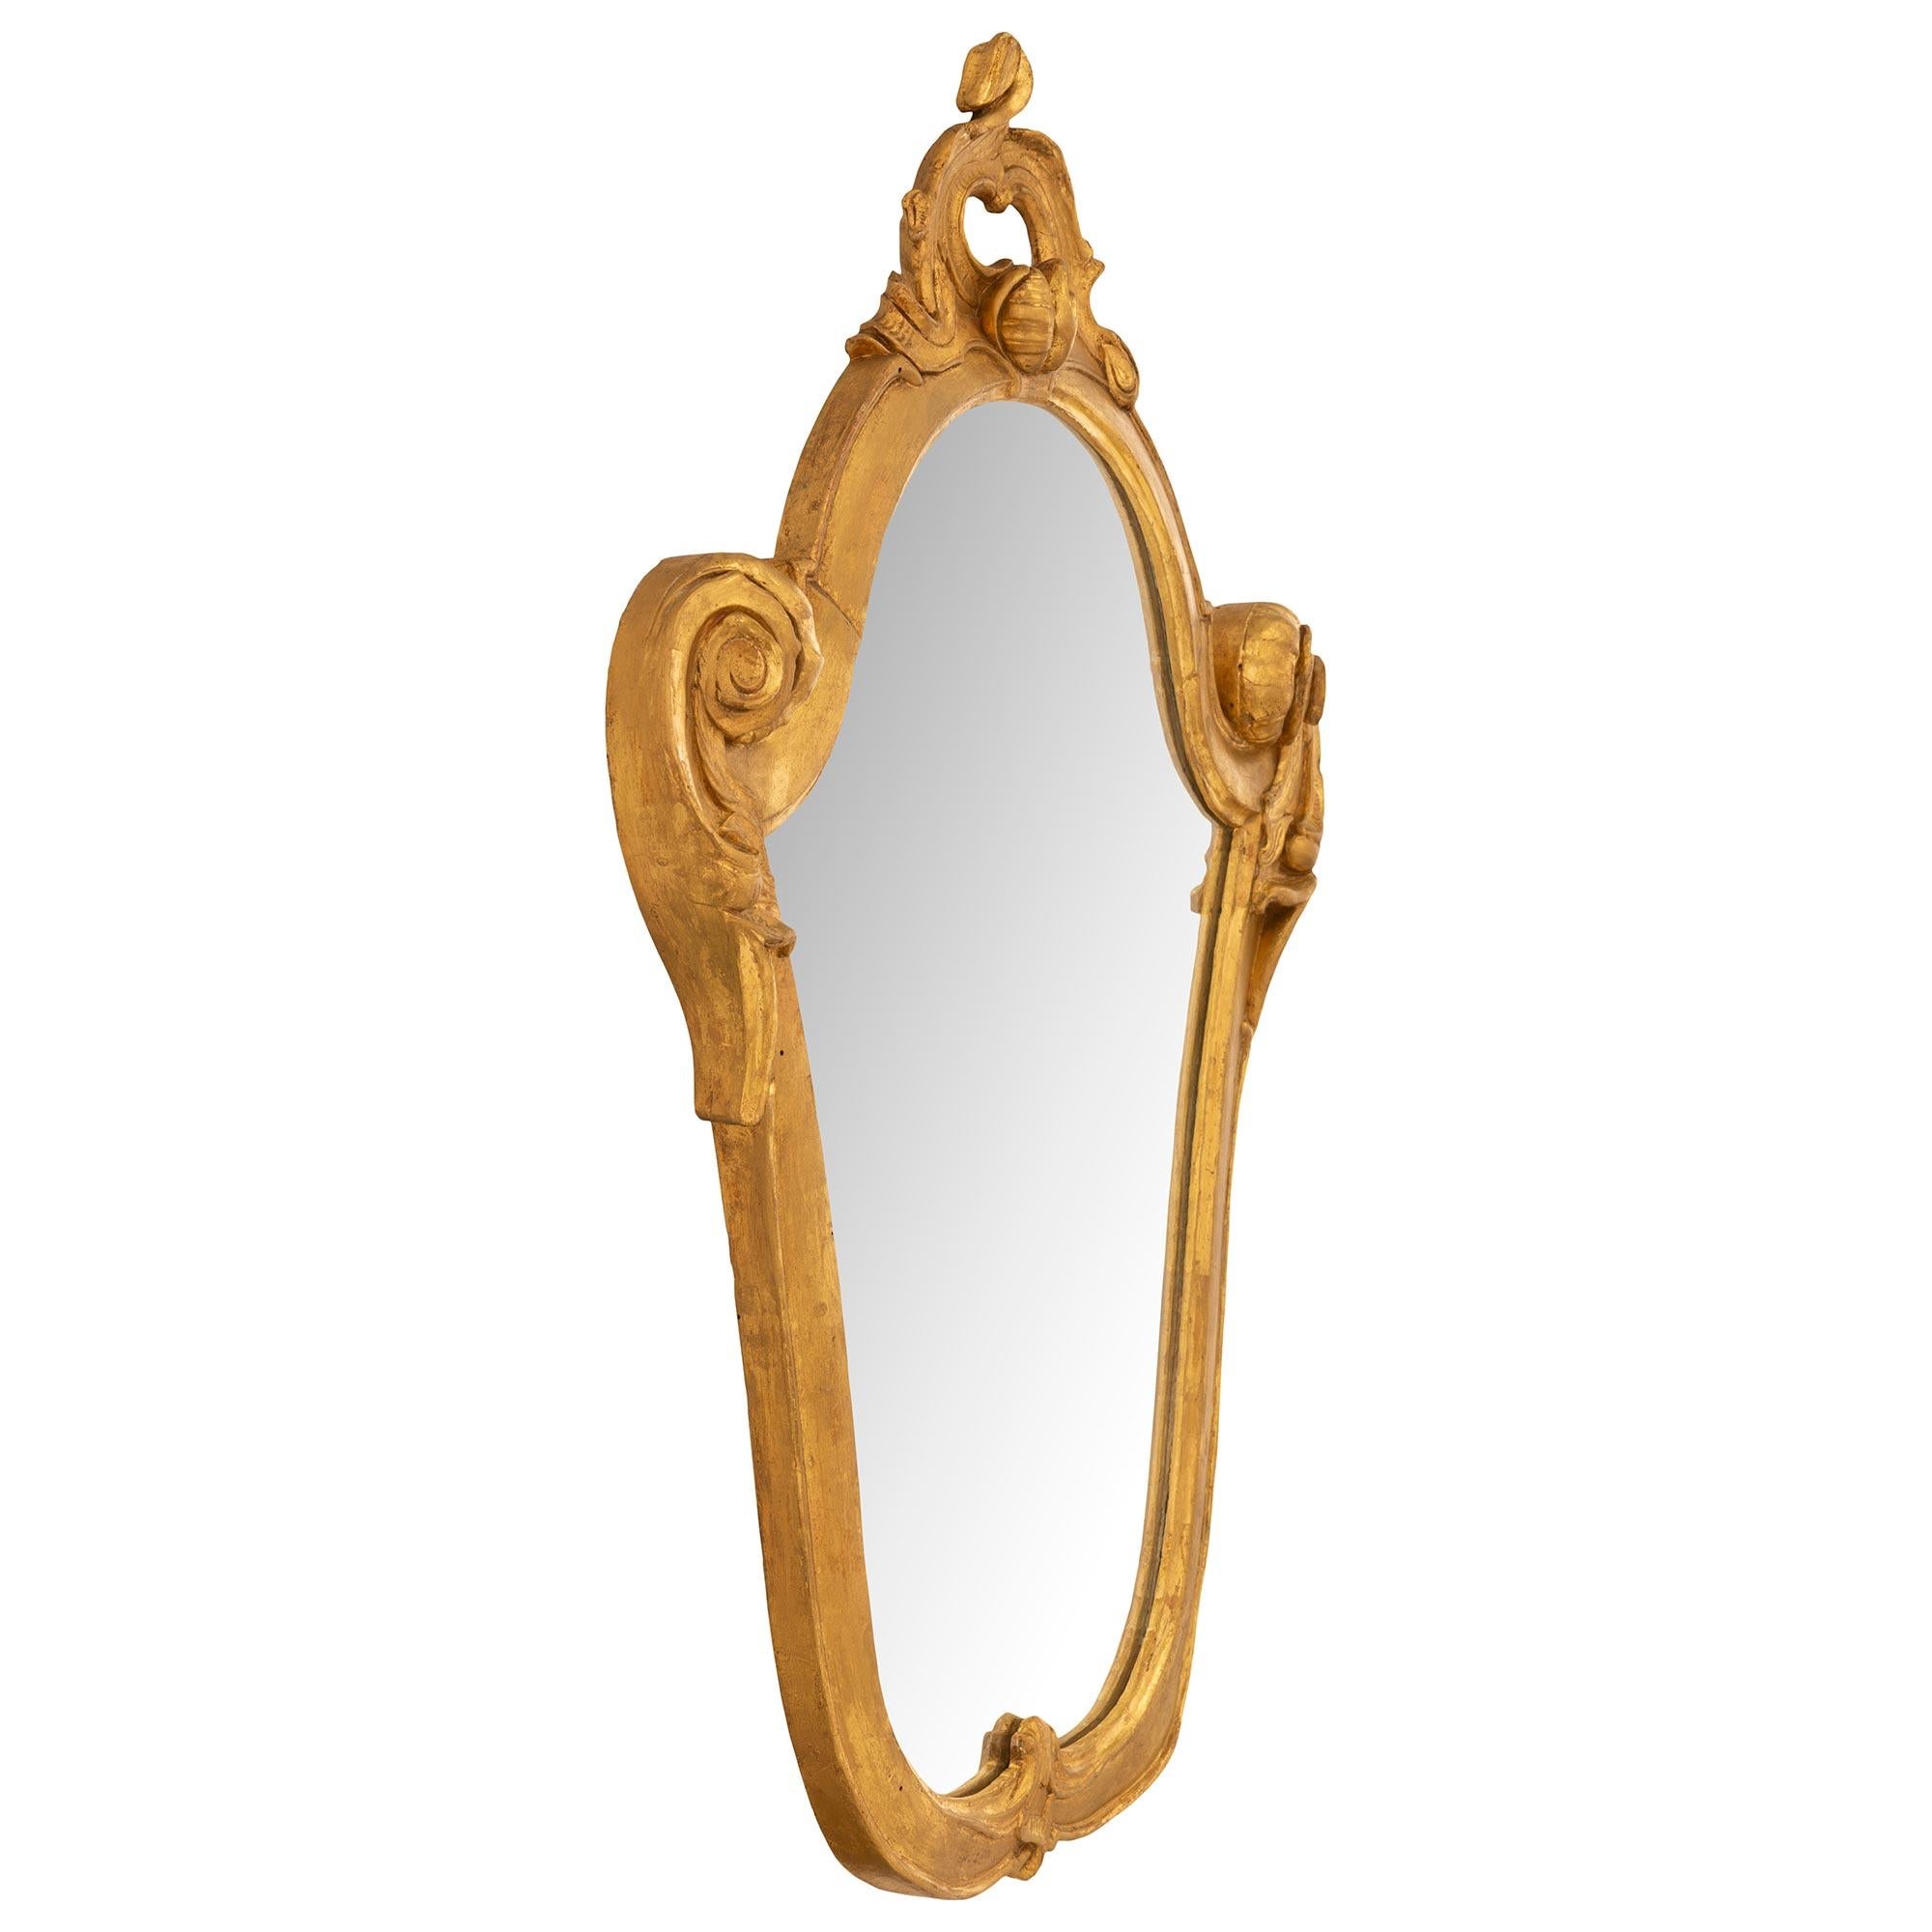 An elegant and very unique set of six Italian 19th century giltwood Venetian mirrors. Each lovely mirror with a scrolled oval shaped frame has an acanthus leaf at the bottom with lovely scrolled sides. At the top is a pierced scrolled design with